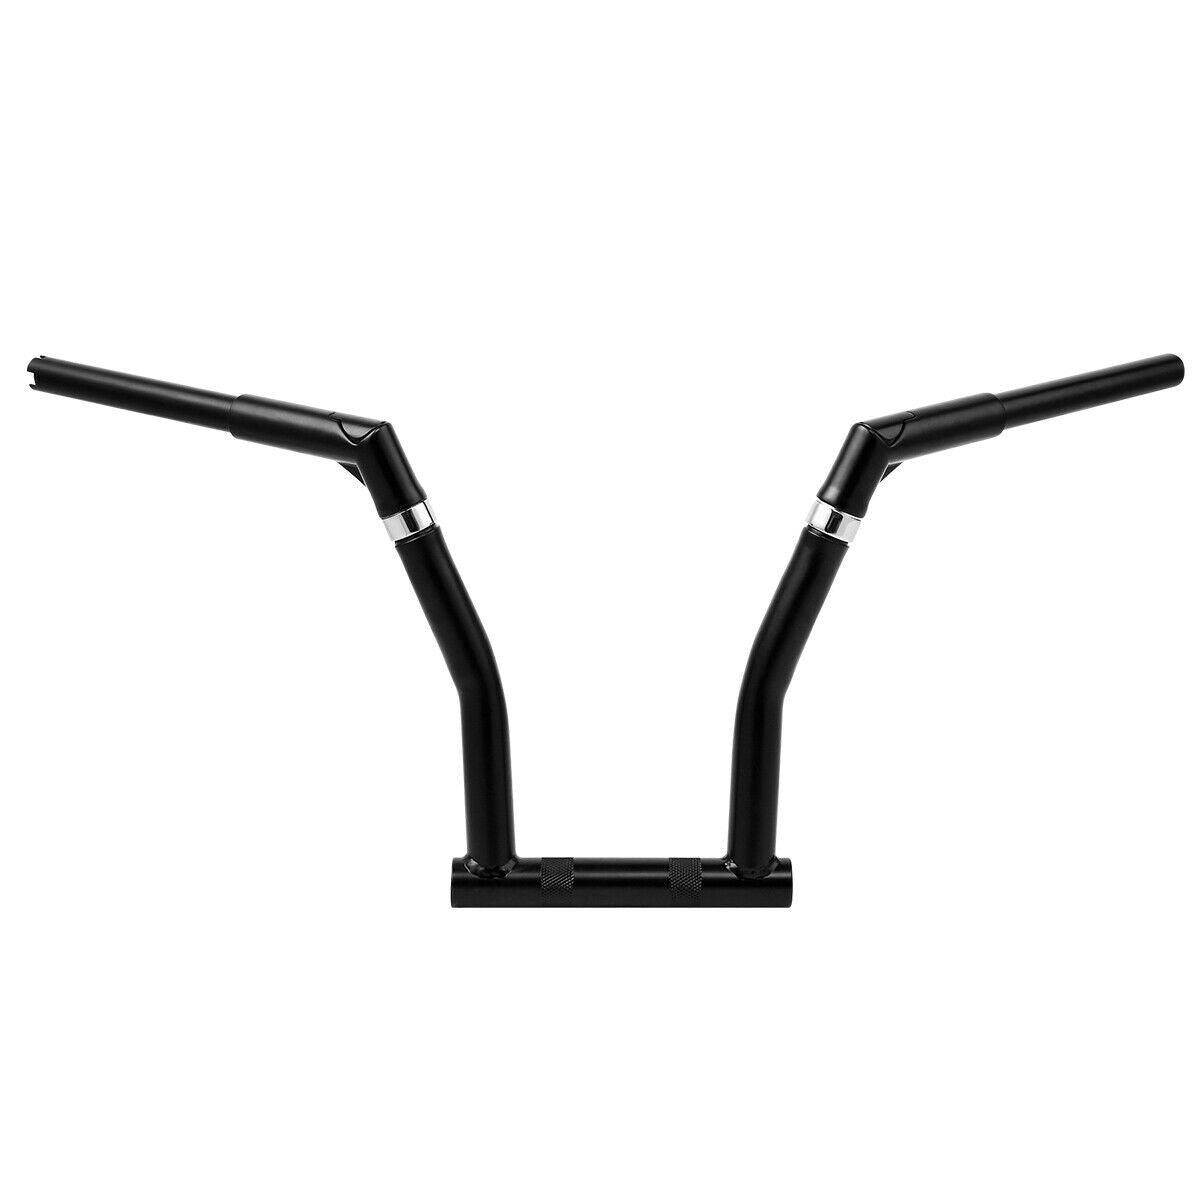 Black 12" Rise 1-1/4" Handlebar Ape Hanger Bar Fit For Harley Softail 2000-2017 - Moto Life Products